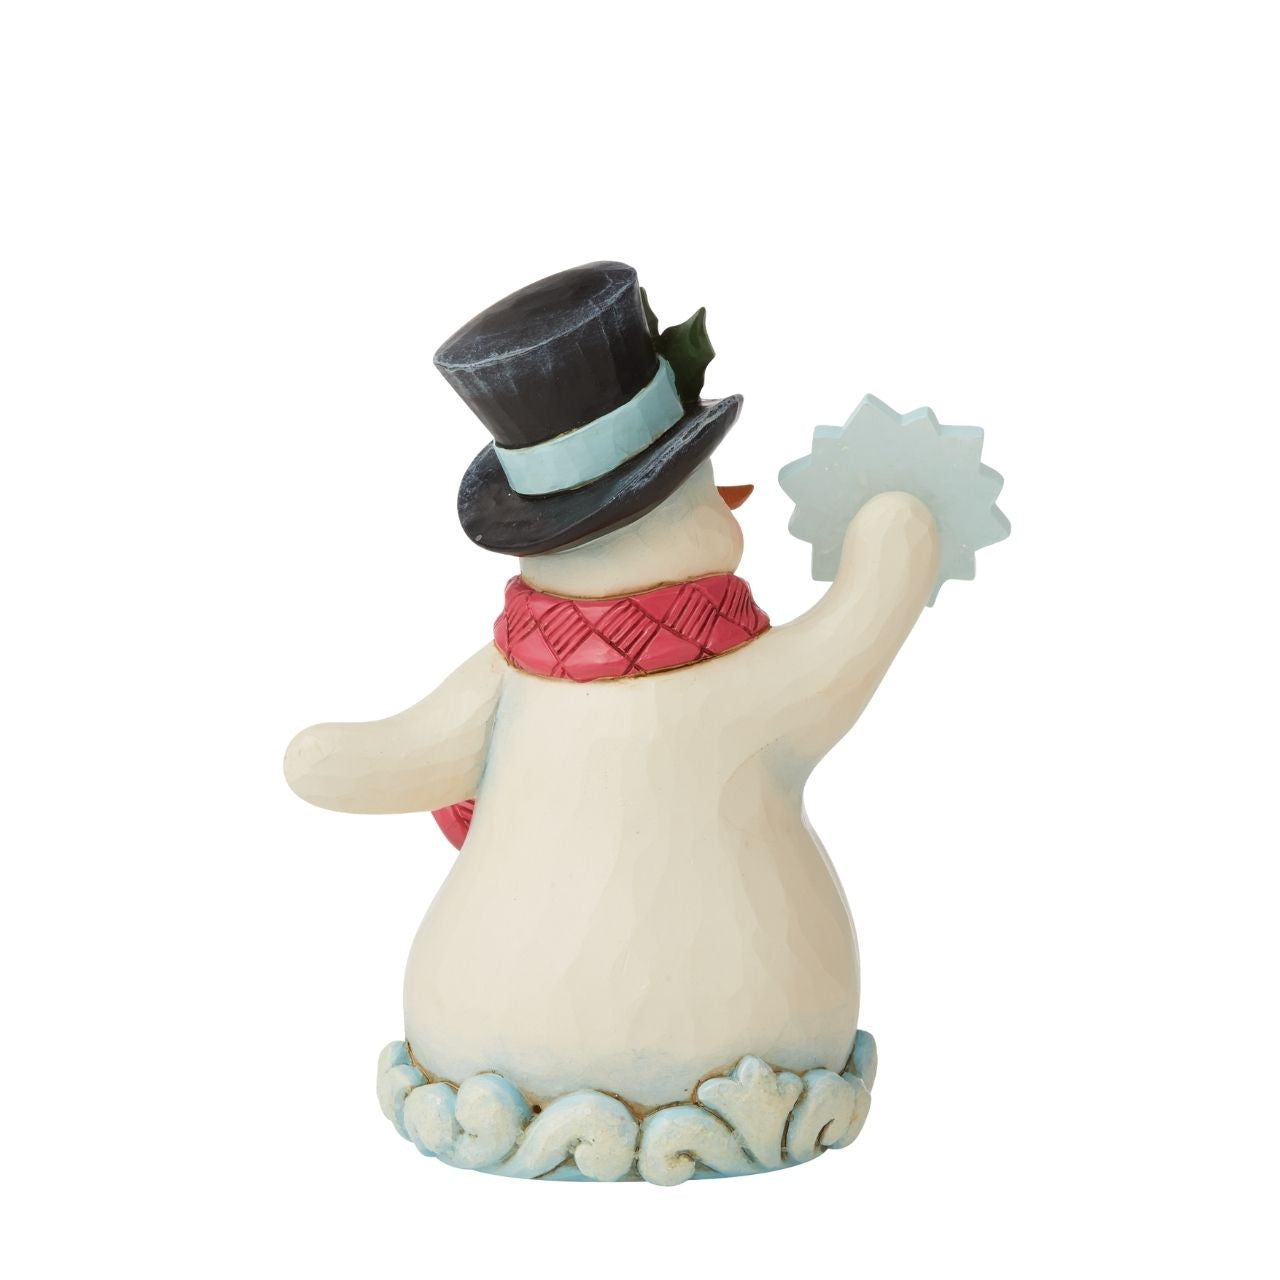 Winter Wonderland Small Snowman Figurine by Jim Shore  "Winter's Simple Joys" This happy Snowman has been designed by Jim Shore as part of his Winter Wonderland collection. Wearing a sweet top hat, he is holding an acrylic snowflake to add to the feeling of snow and ice before added embellishments of glitter are added.